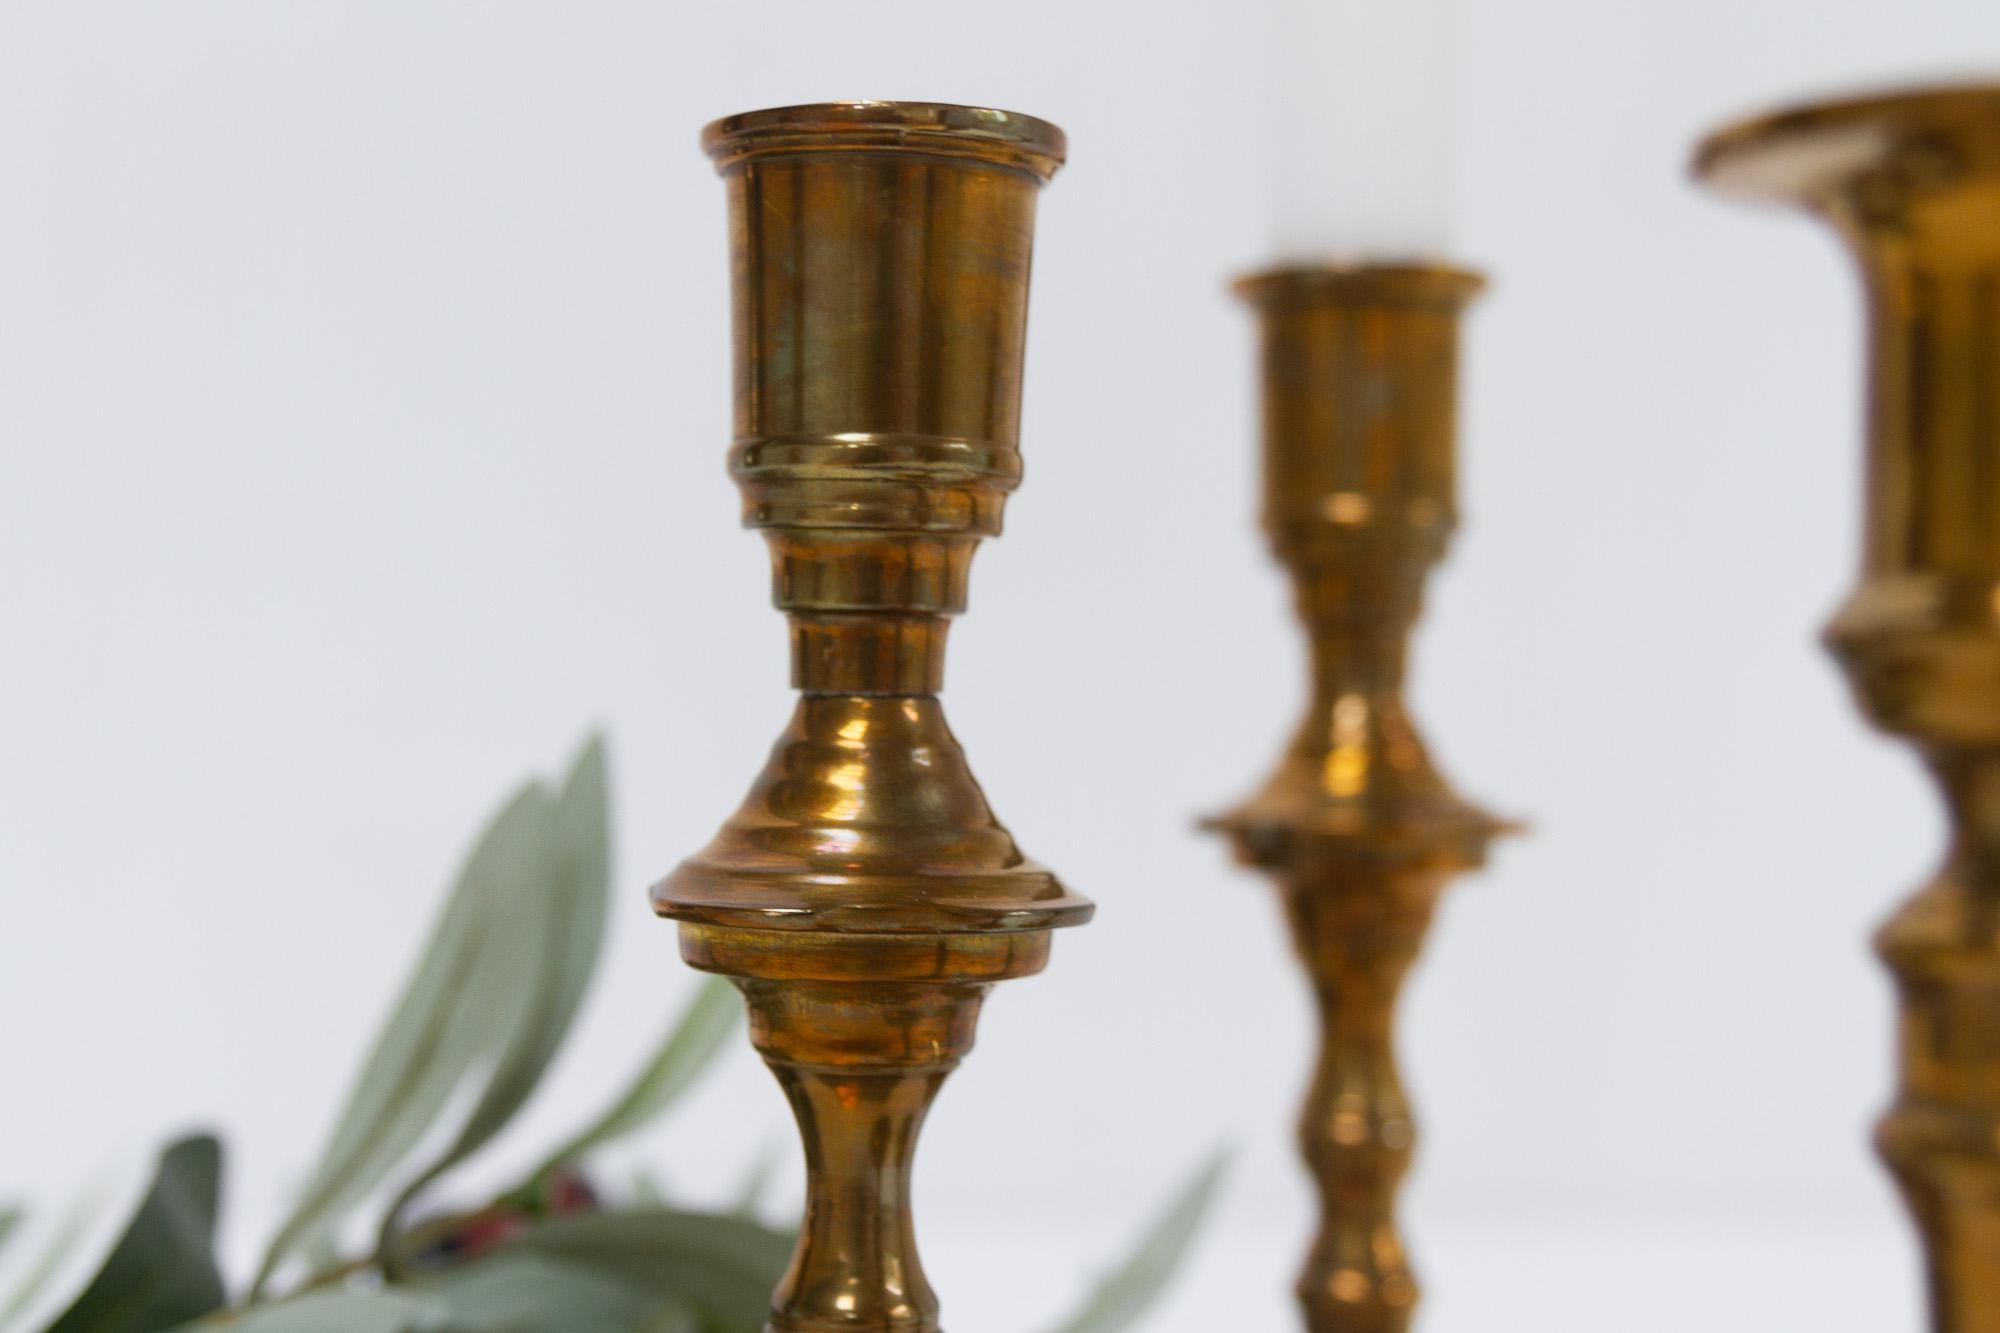 Vintage Danish Malm Candle Holders, 1950s. Set of 4. For Sale 4